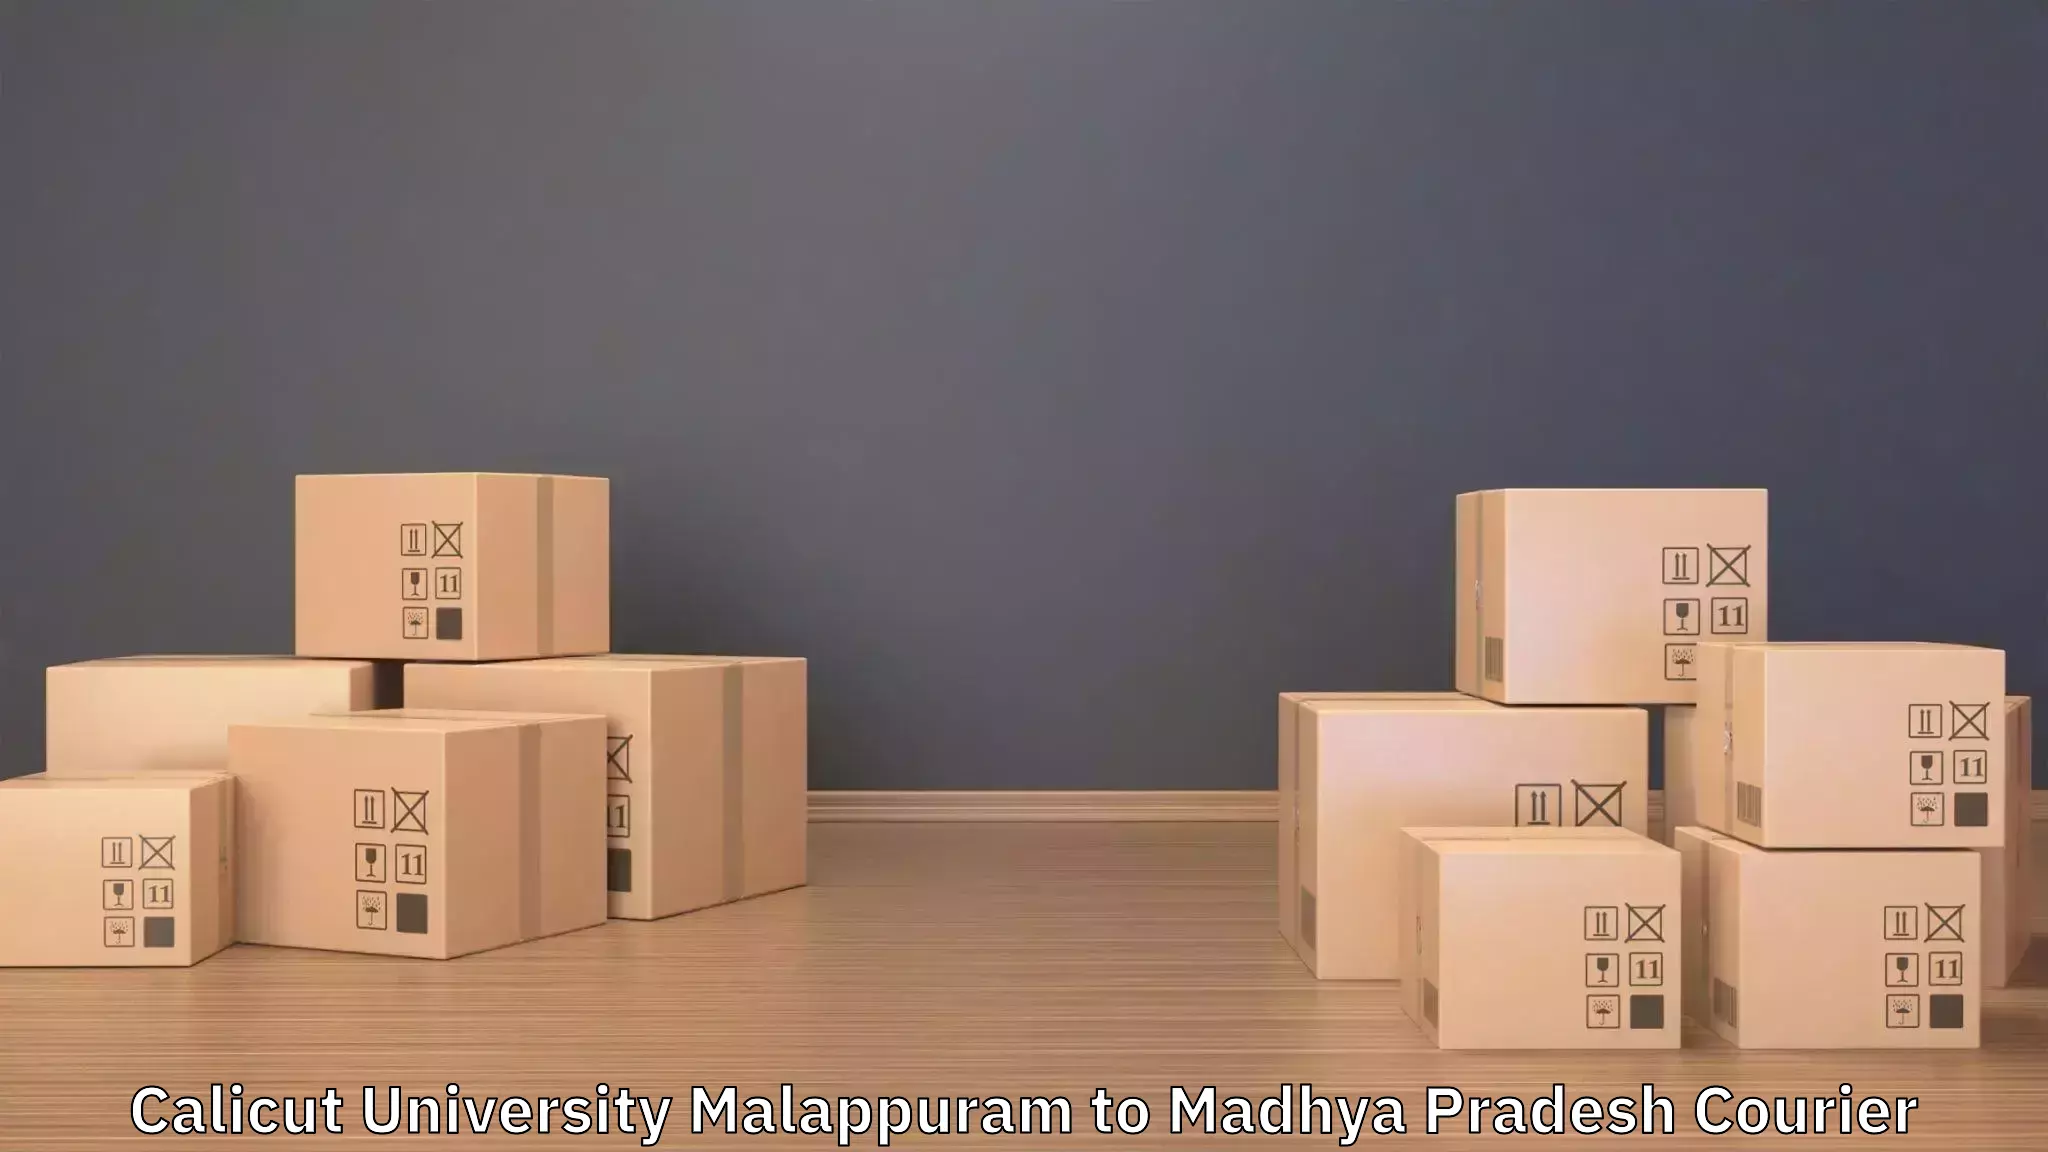 Moving and handling services Calicut University Malappuram to Neemuch